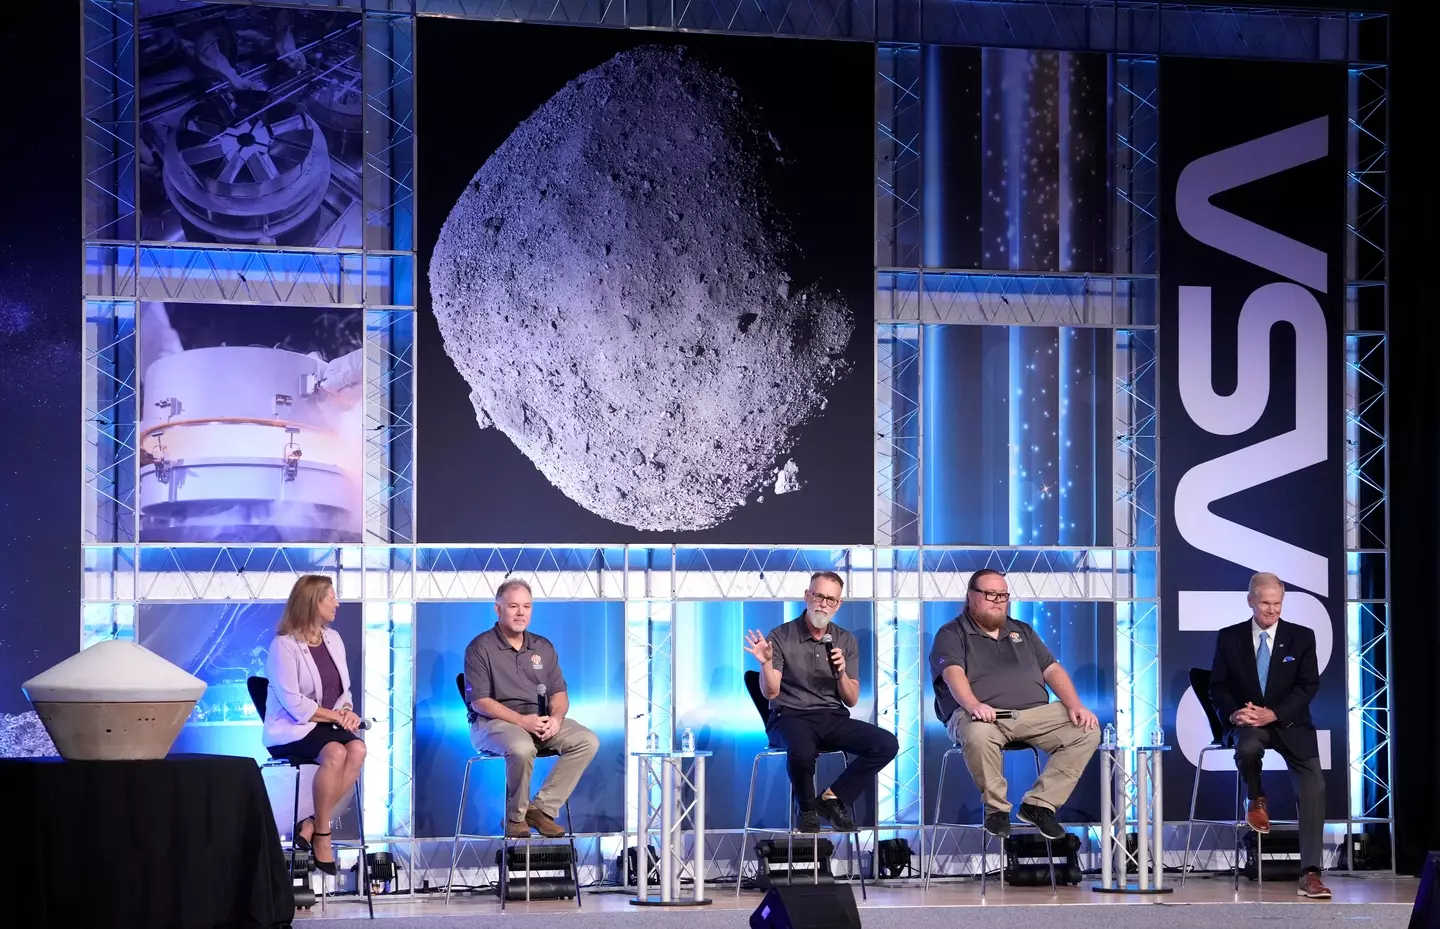 The rocks and dust were collected from asteroid Bennu.